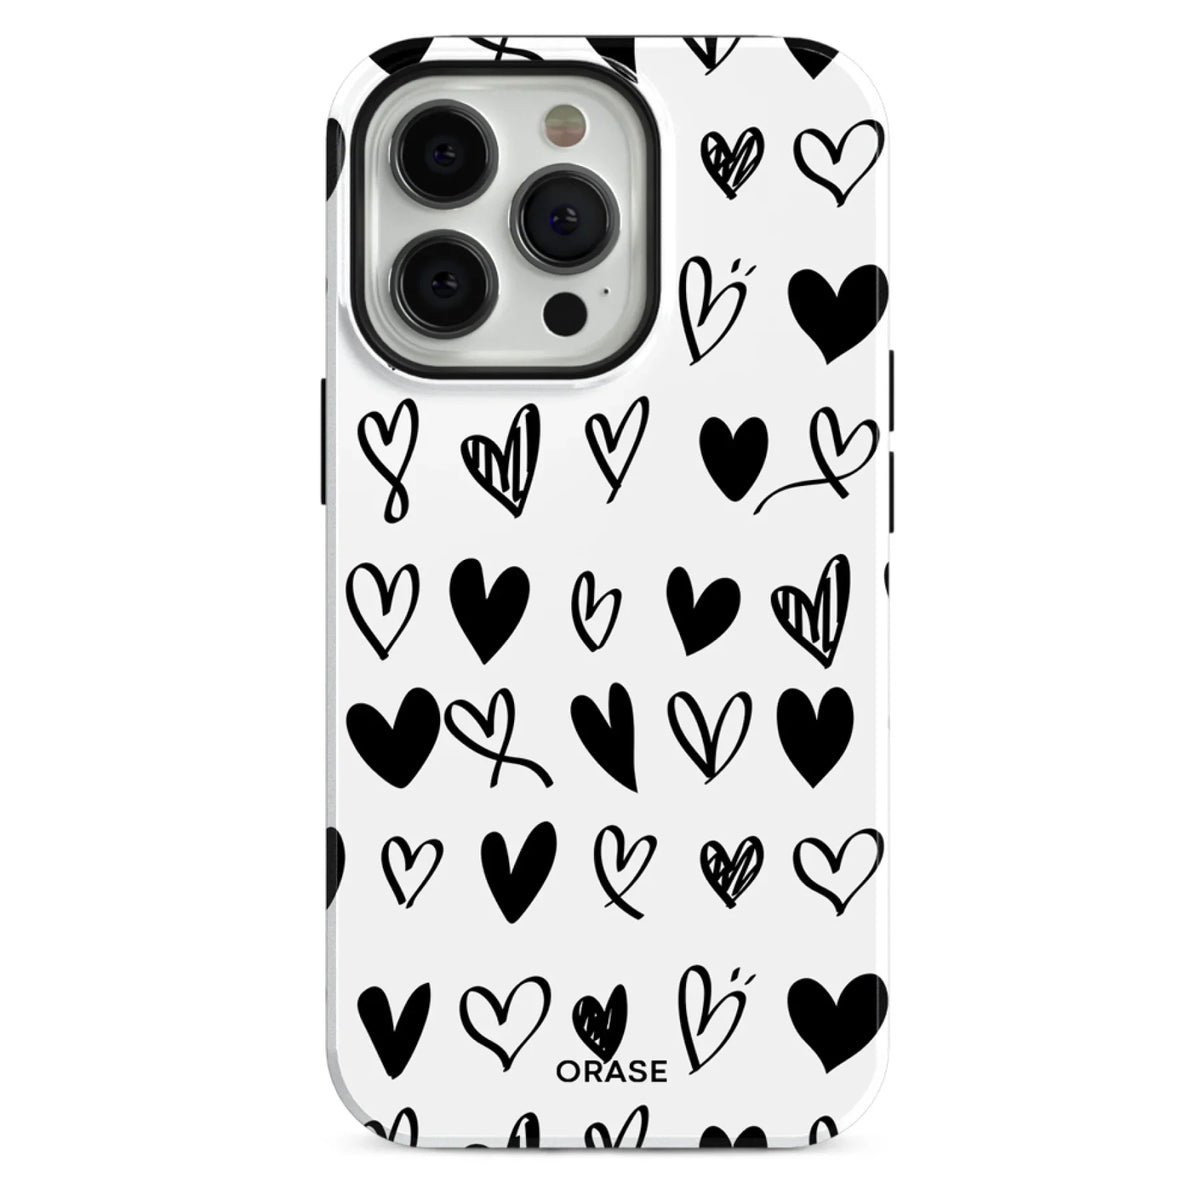 Love Vibes Hearts iPhone Case - iPhone 12 Pro